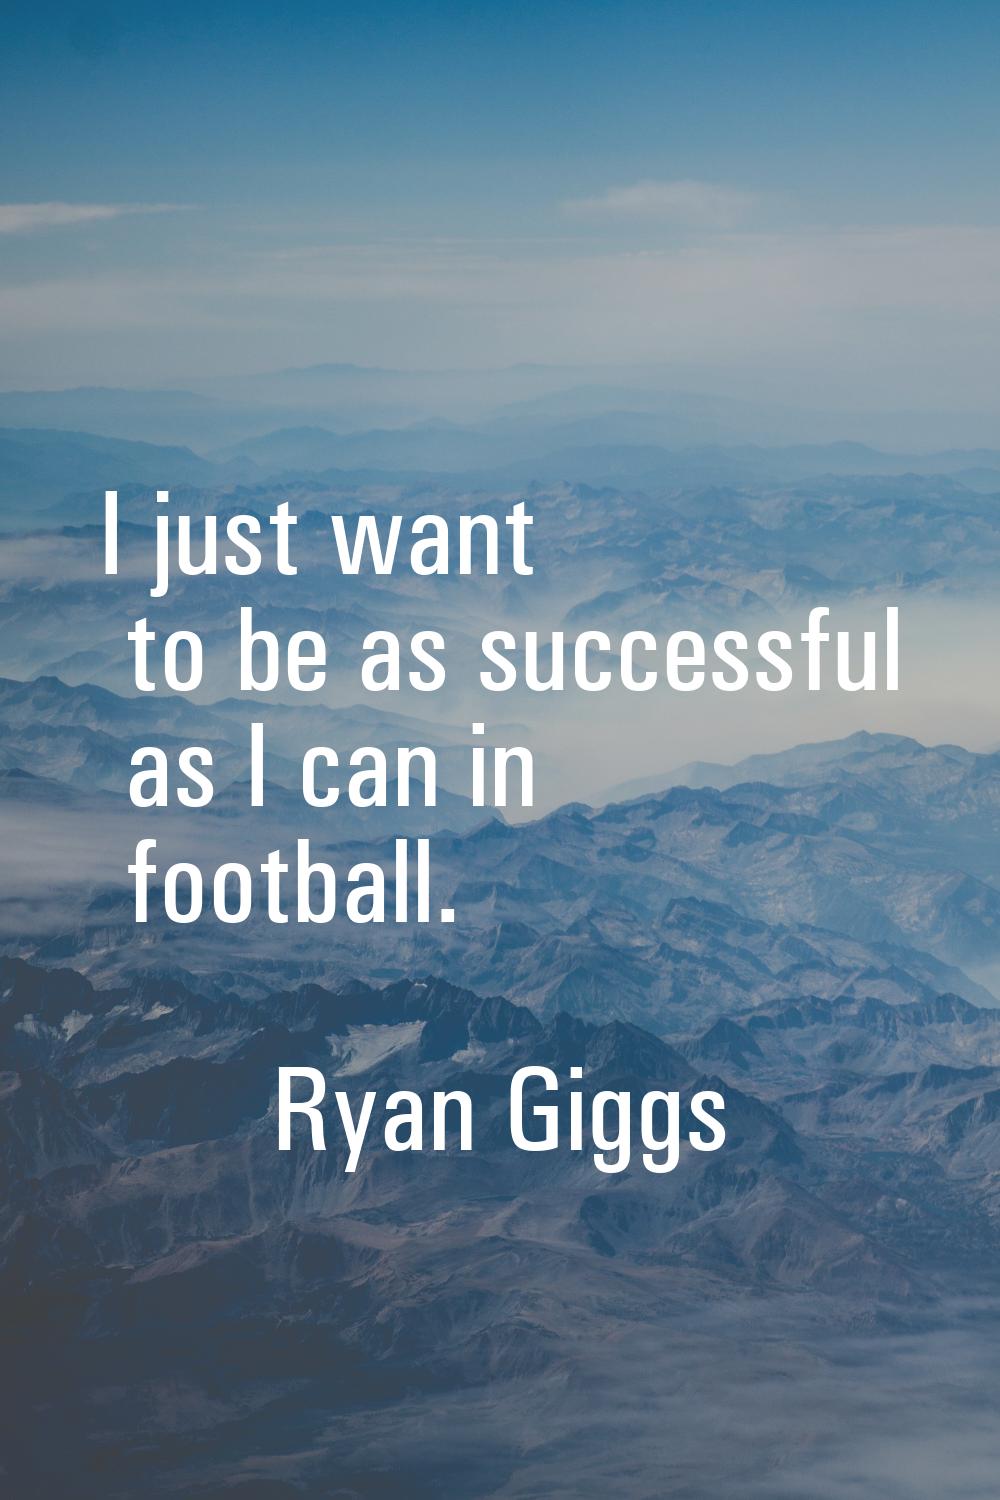 I just want to be as successful as I can in football.